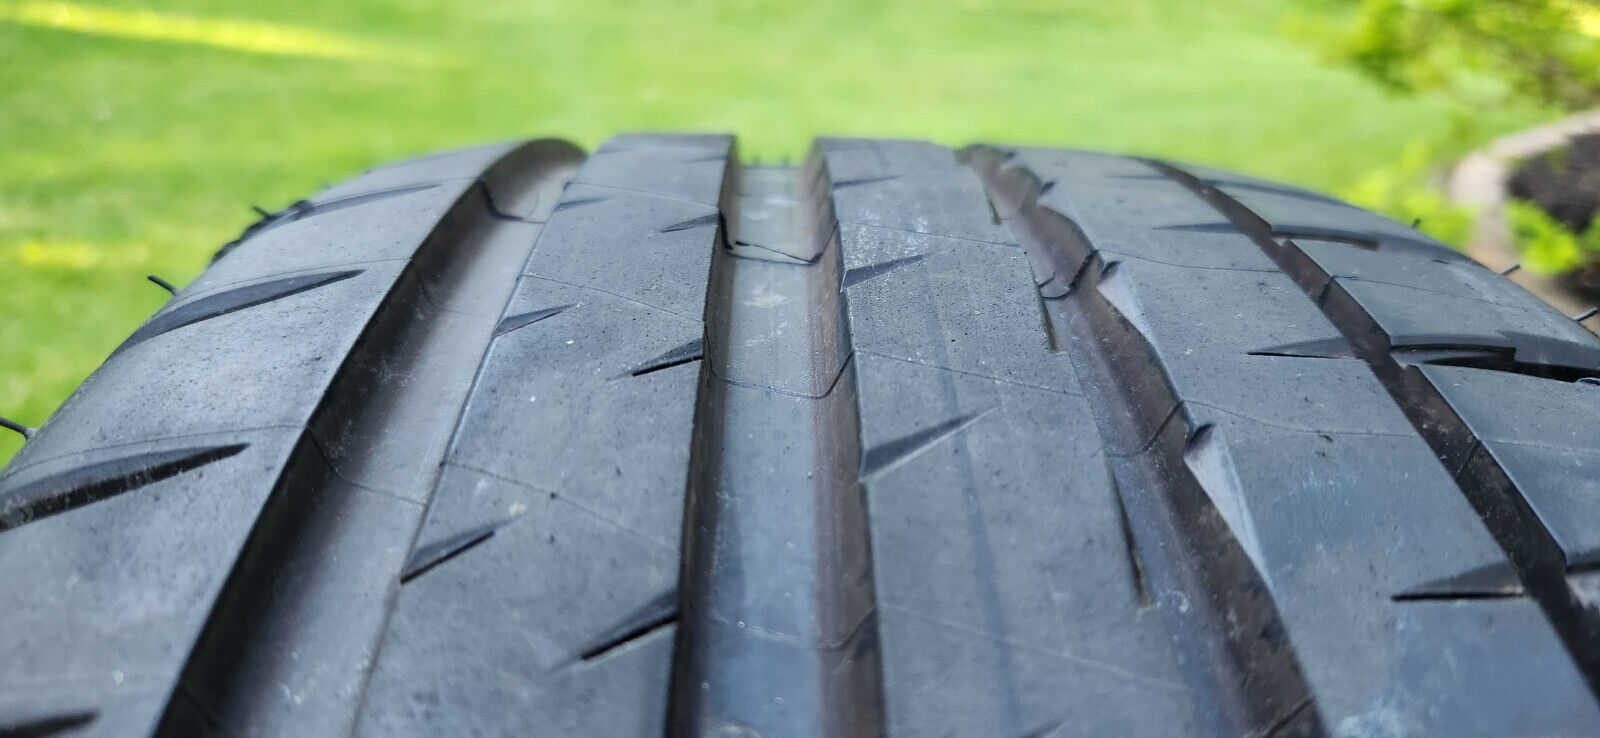 (2) Michelin Pilot Sport 4S 225/40ZR19 Tires (Just 64 miles driven)  Great Deal